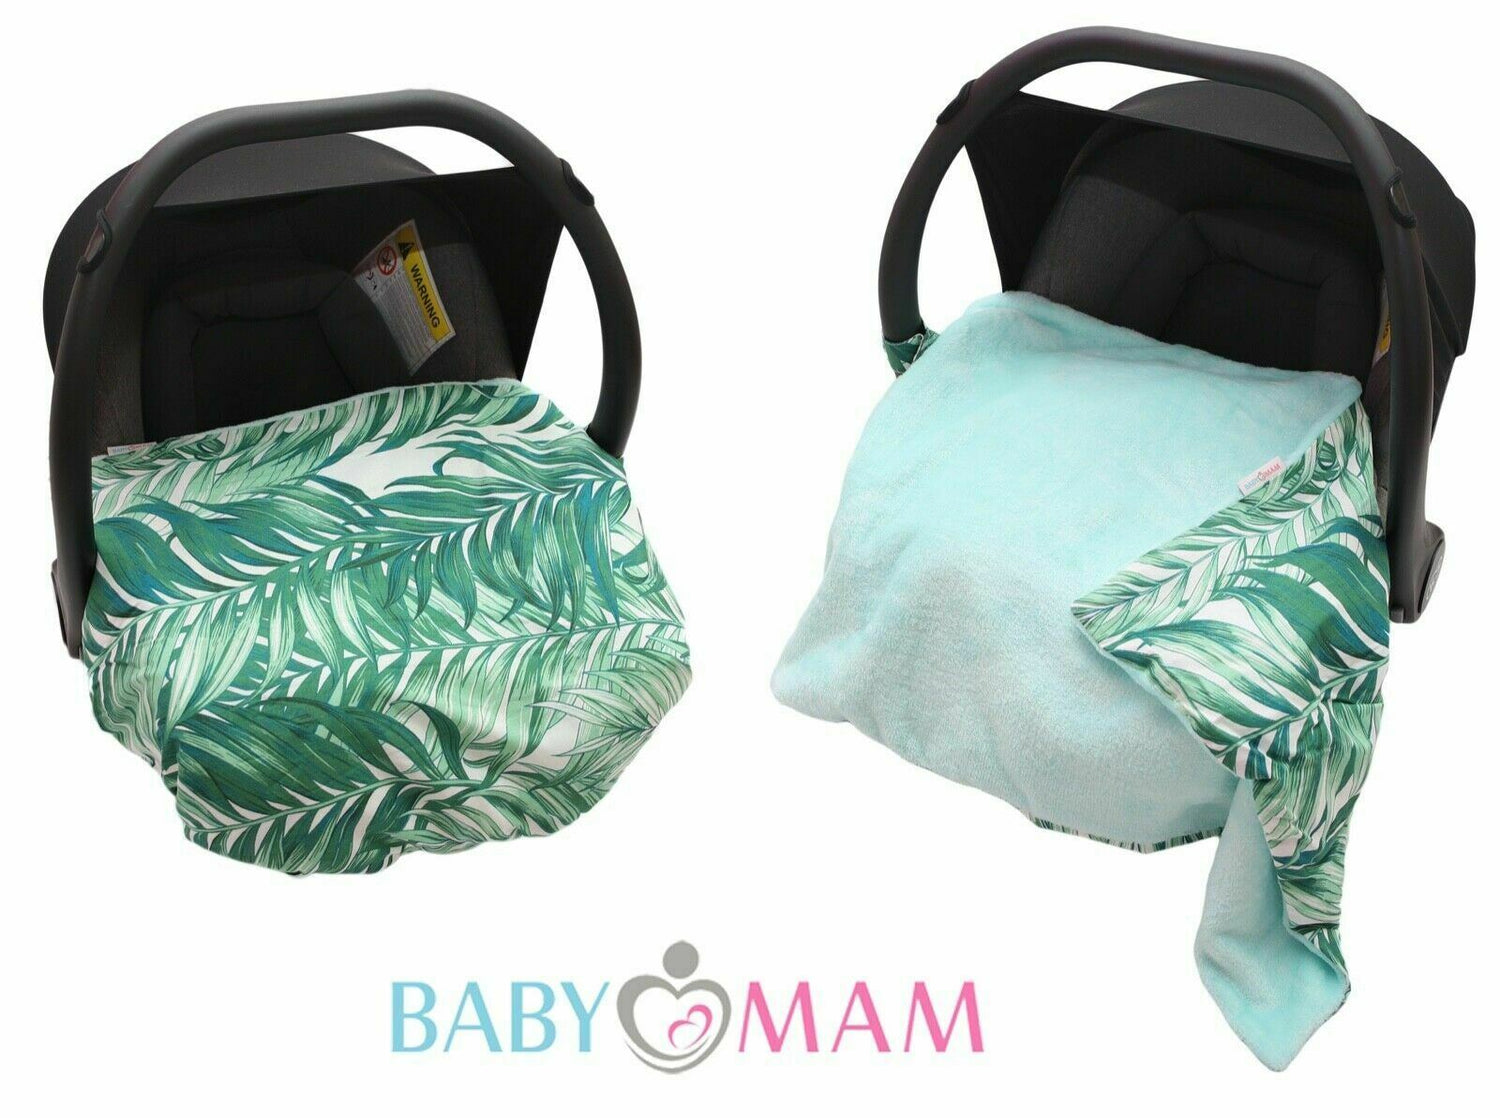 Car Seat Kids Baby Swaddle Travel Cotton Blanket 75X50cm Soft Wrap Double Sided Green-Green Leaves